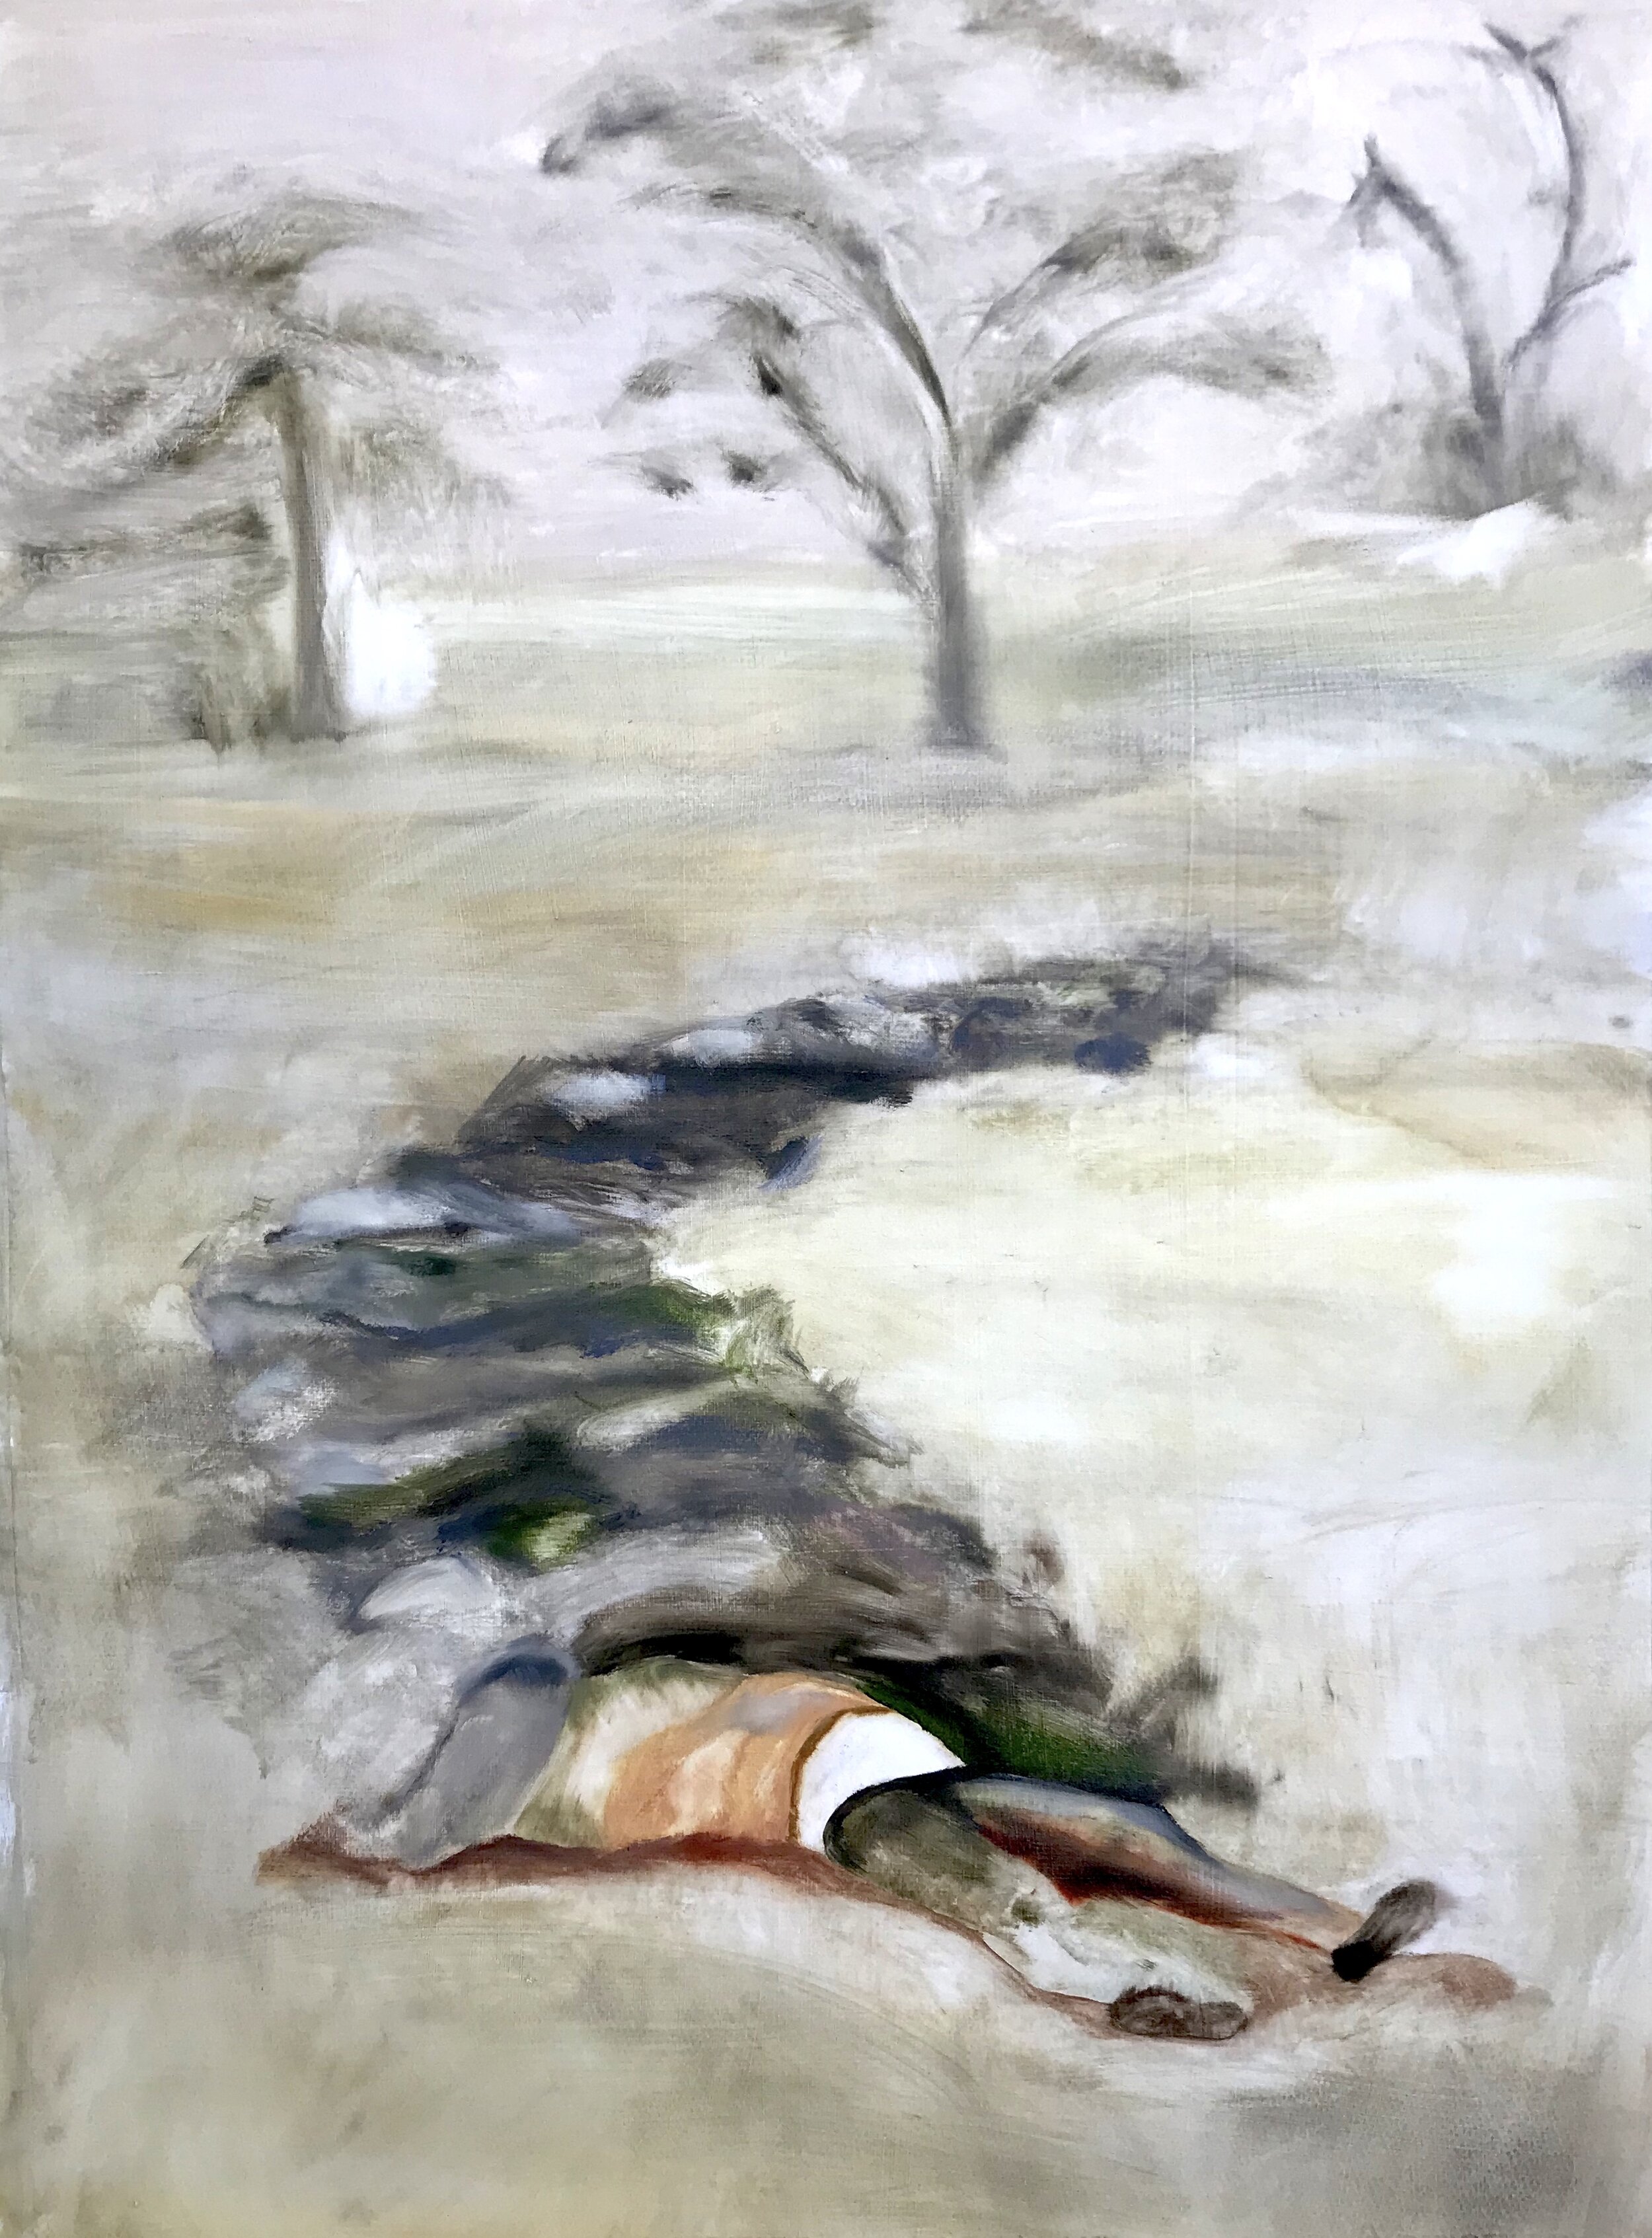  Waiting to be Buried, 1864. 2018. oil on paper. 76.2cm x 55.88cm 